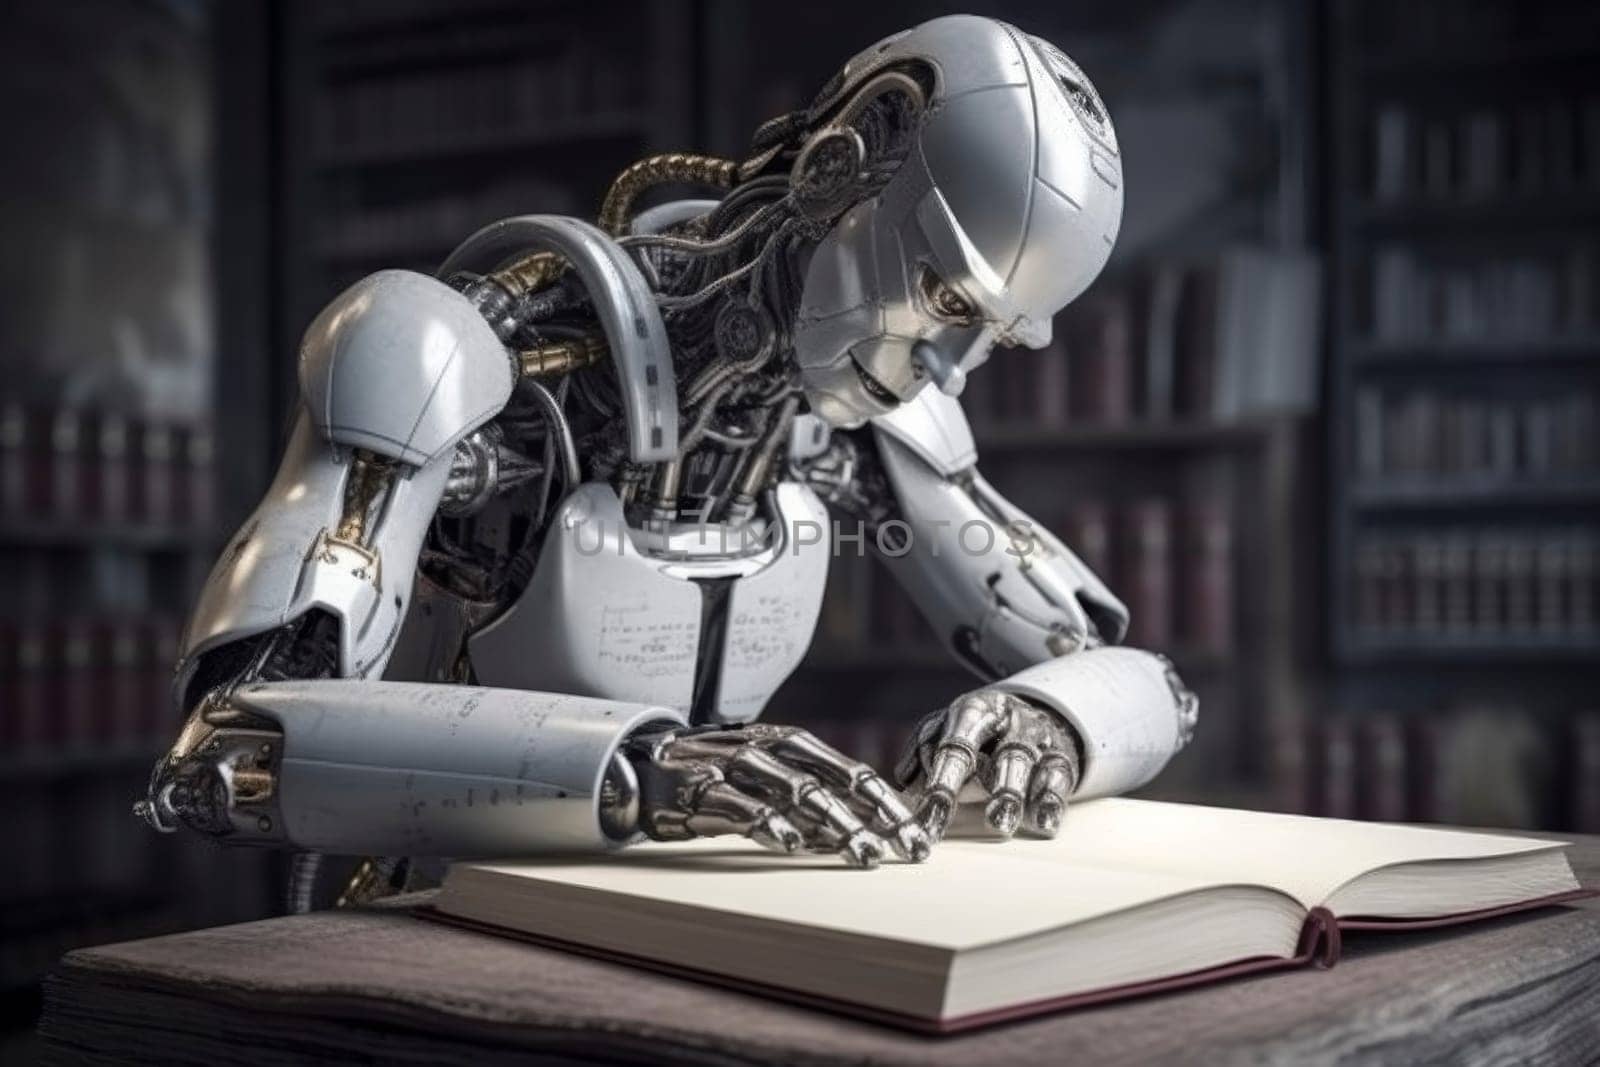 A futuristic robot engrossed in reading a book, surrounded by shelves filled with books, depicting advanced learning or artificial intelligence gaining knowledge.